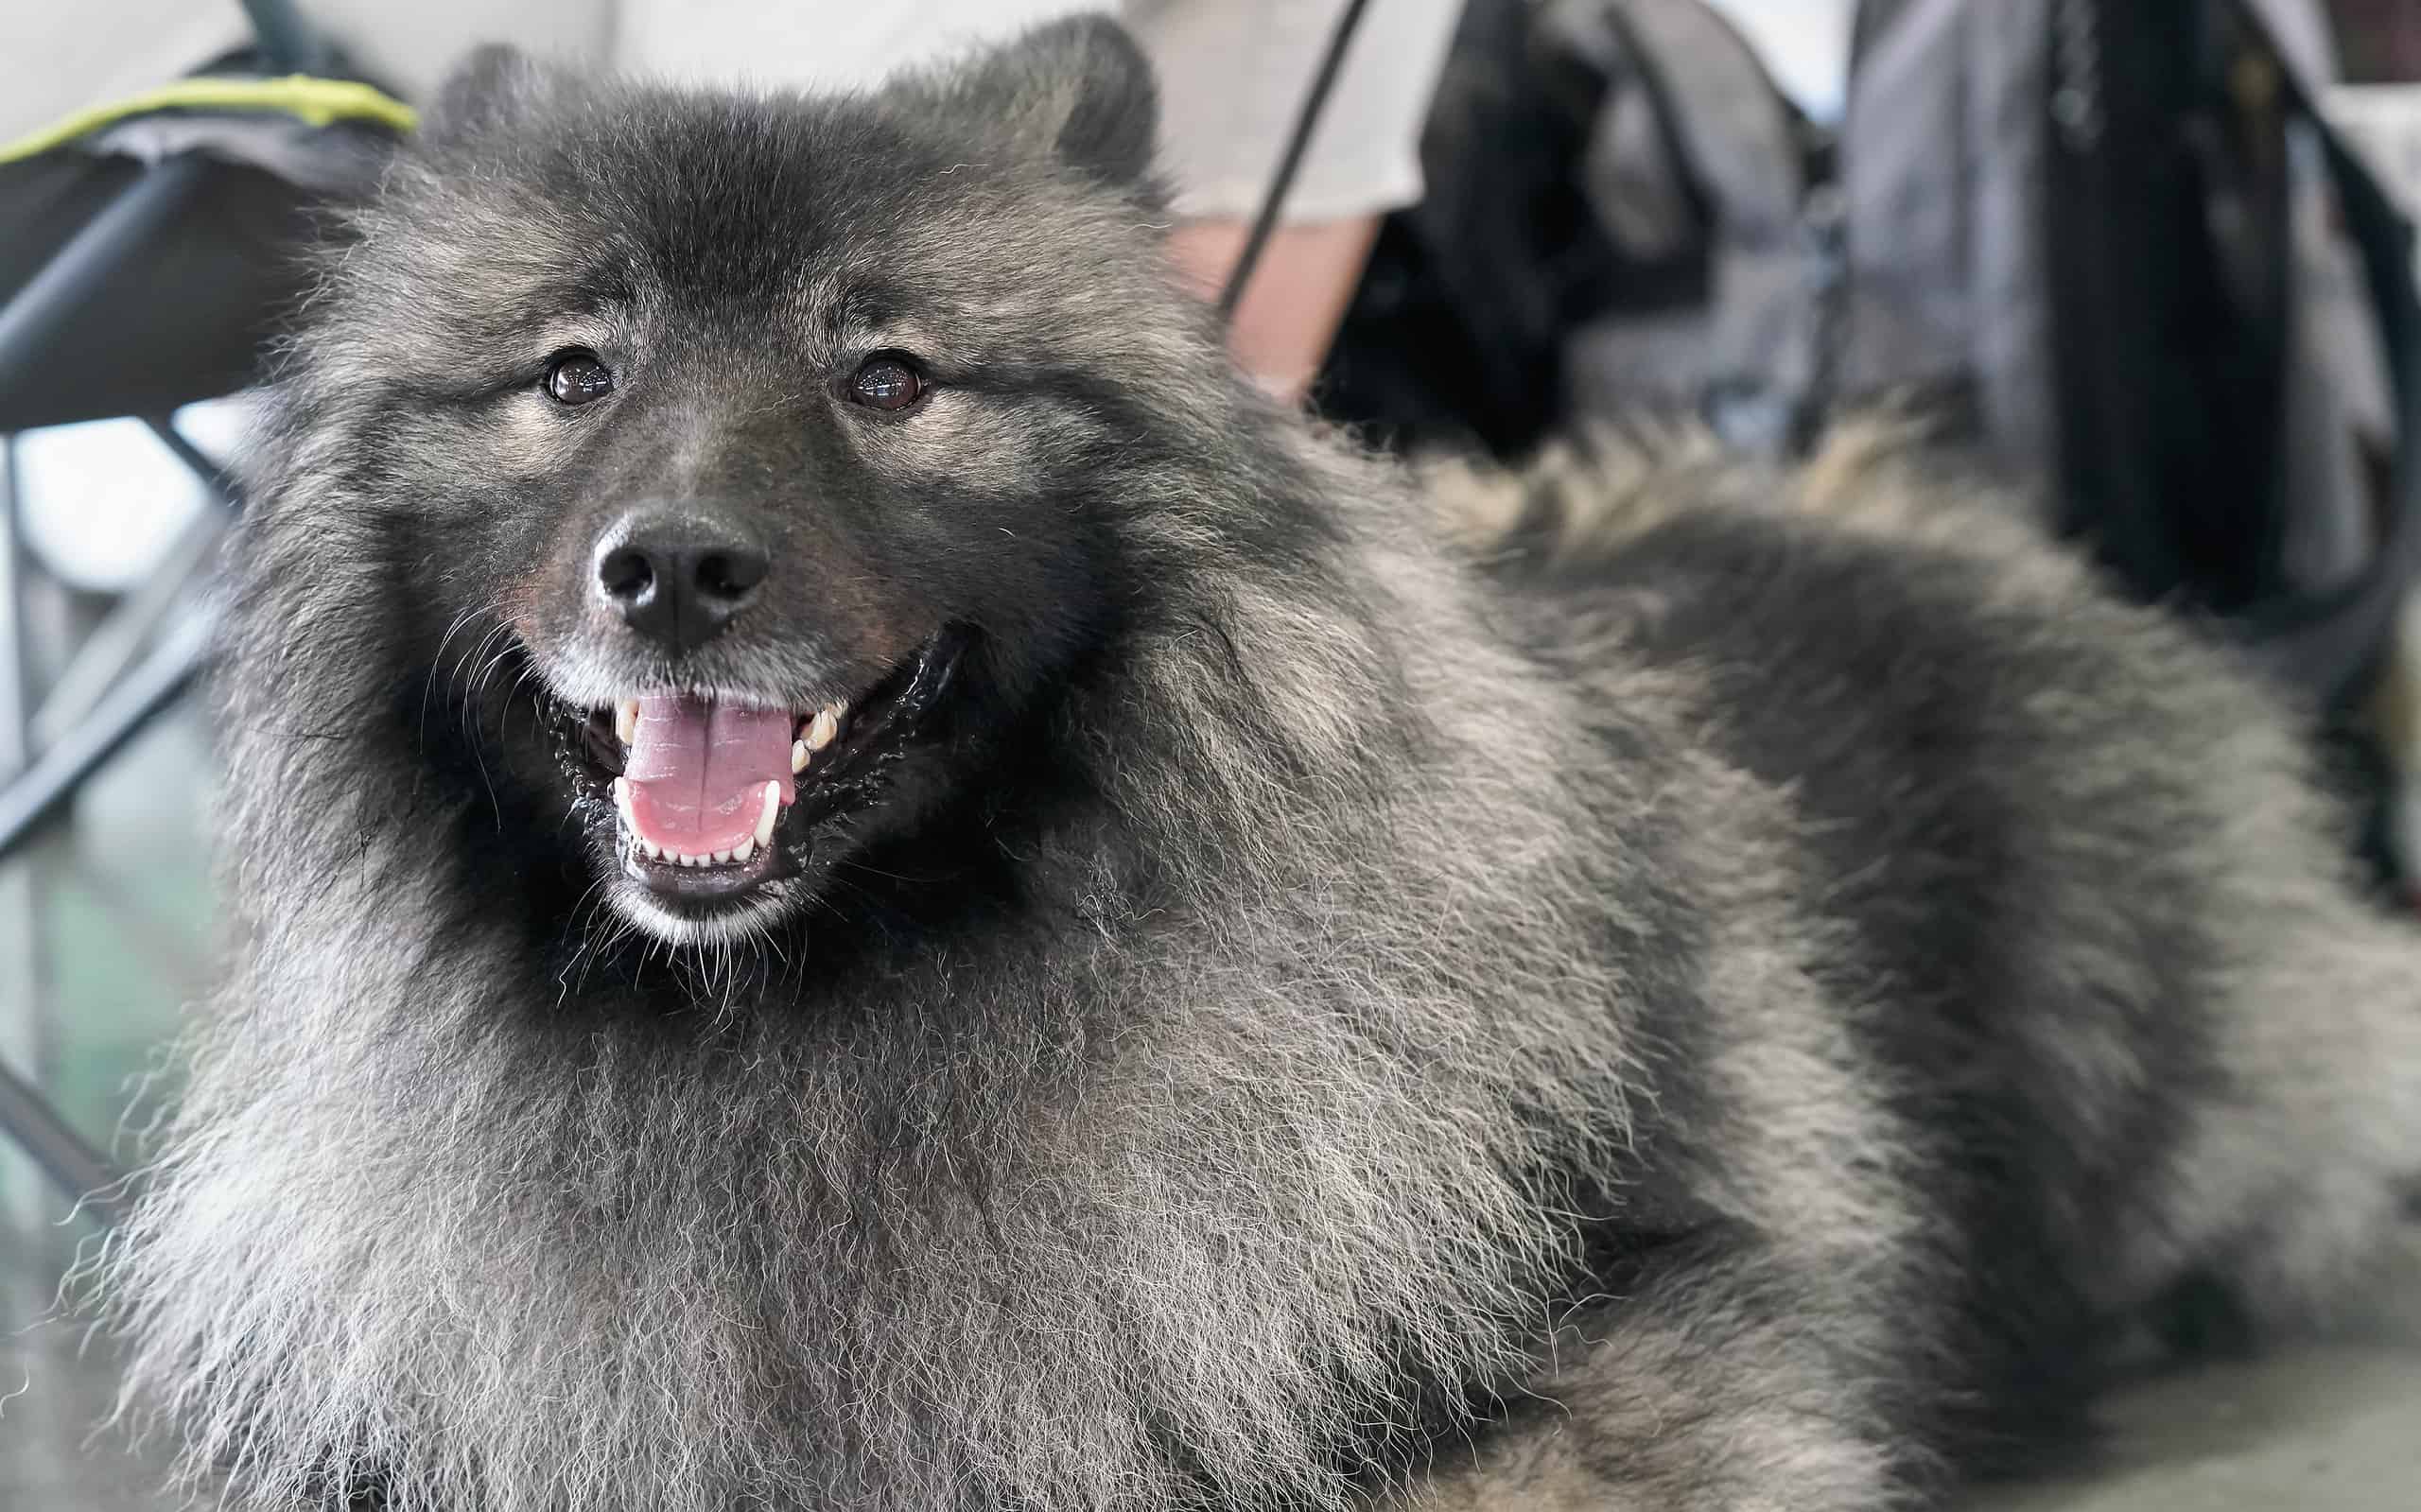 Black and silver Keeshond German spitz breed closeup on head with open mouth